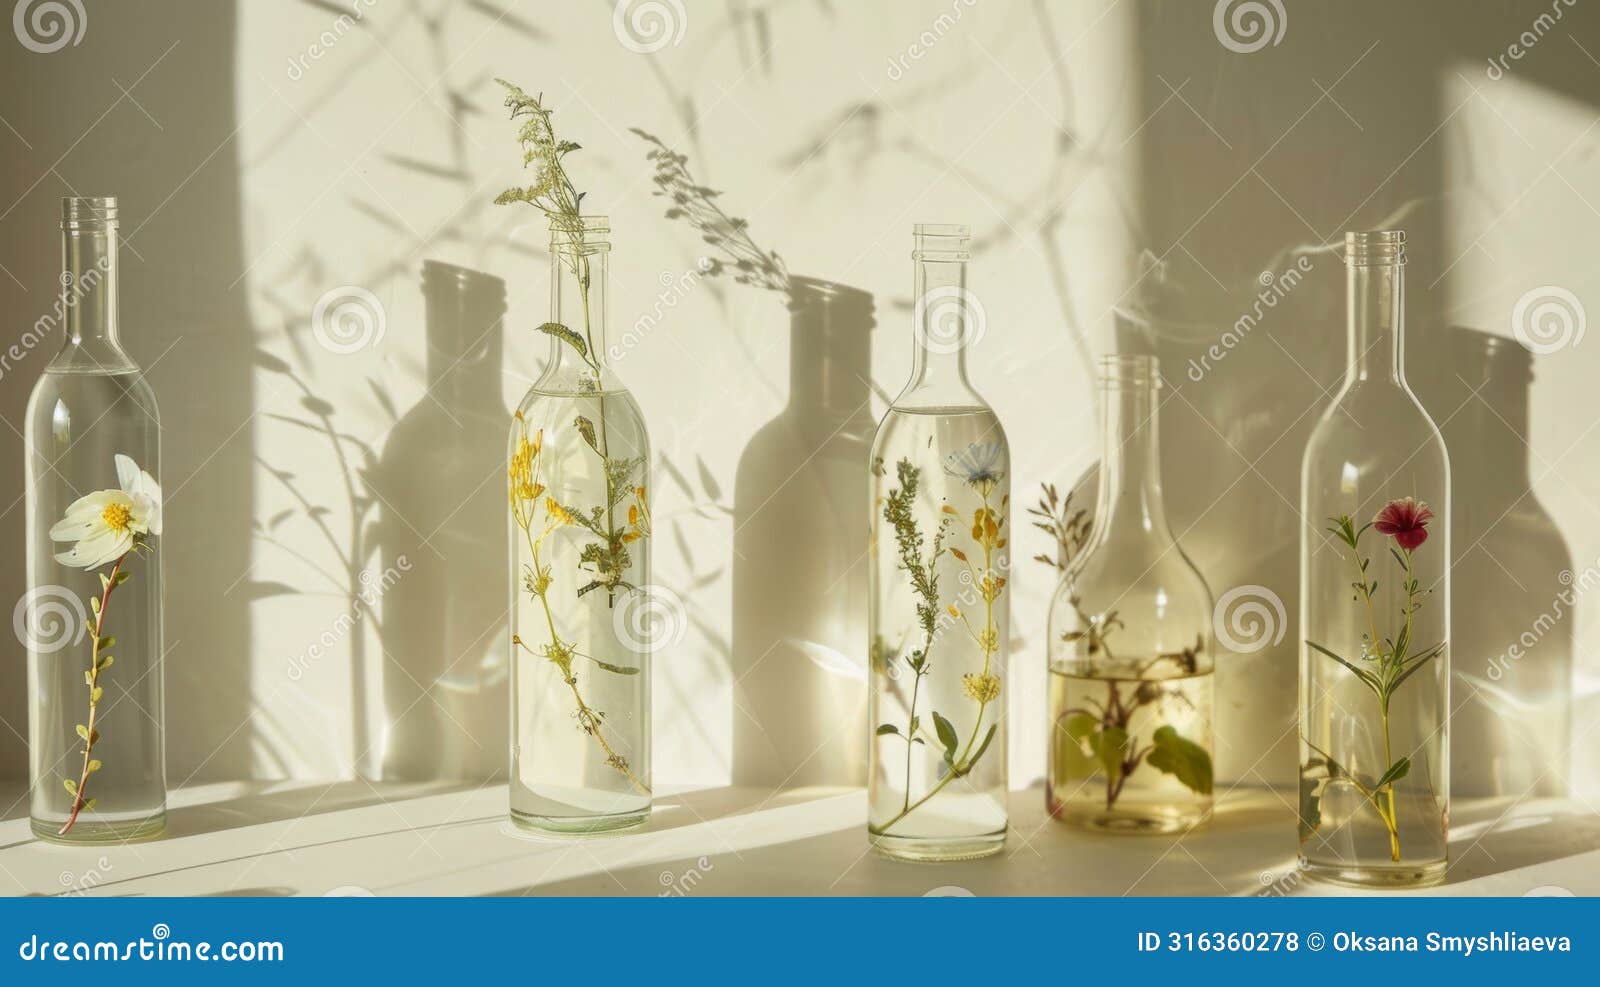 transparent bottles with botanical specimens bask in the natural light, casting delicate shadows that echo an ethereal